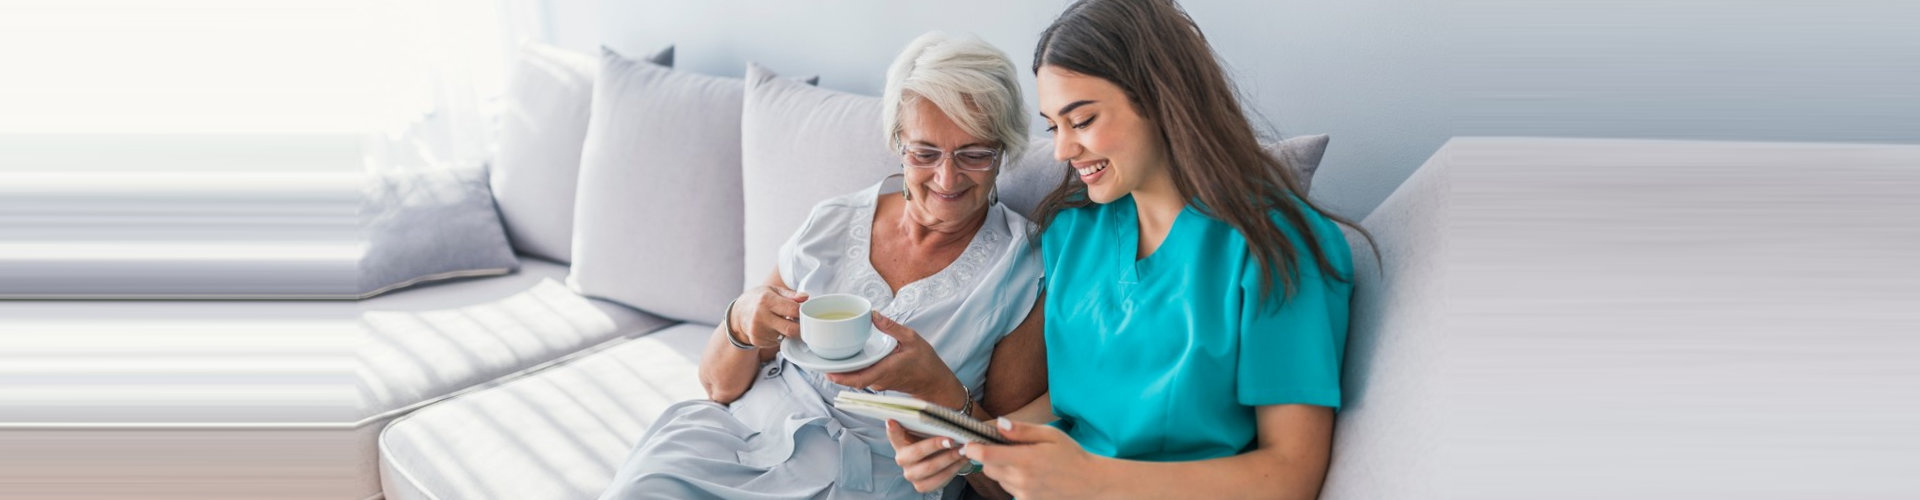 caregiver and senior woman holding a cup of tea smiling